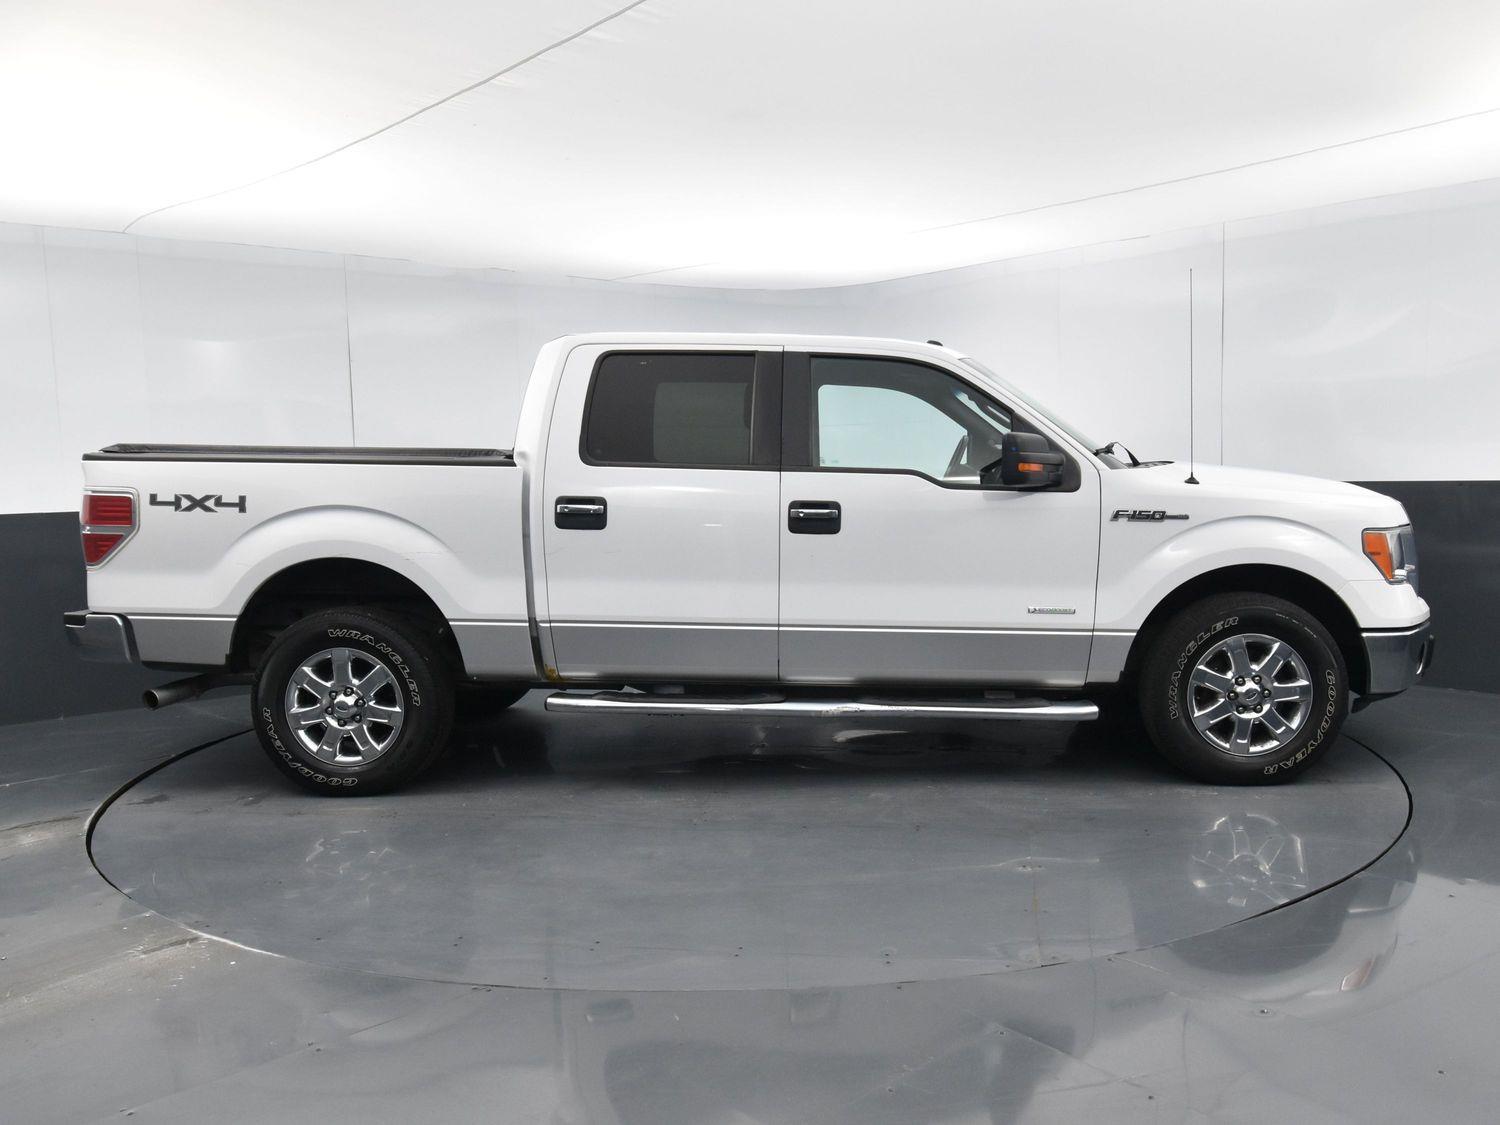 Used 2014 Ford F-150 XLT SuperCrew Cab Styleside for sale in Grand Island NE